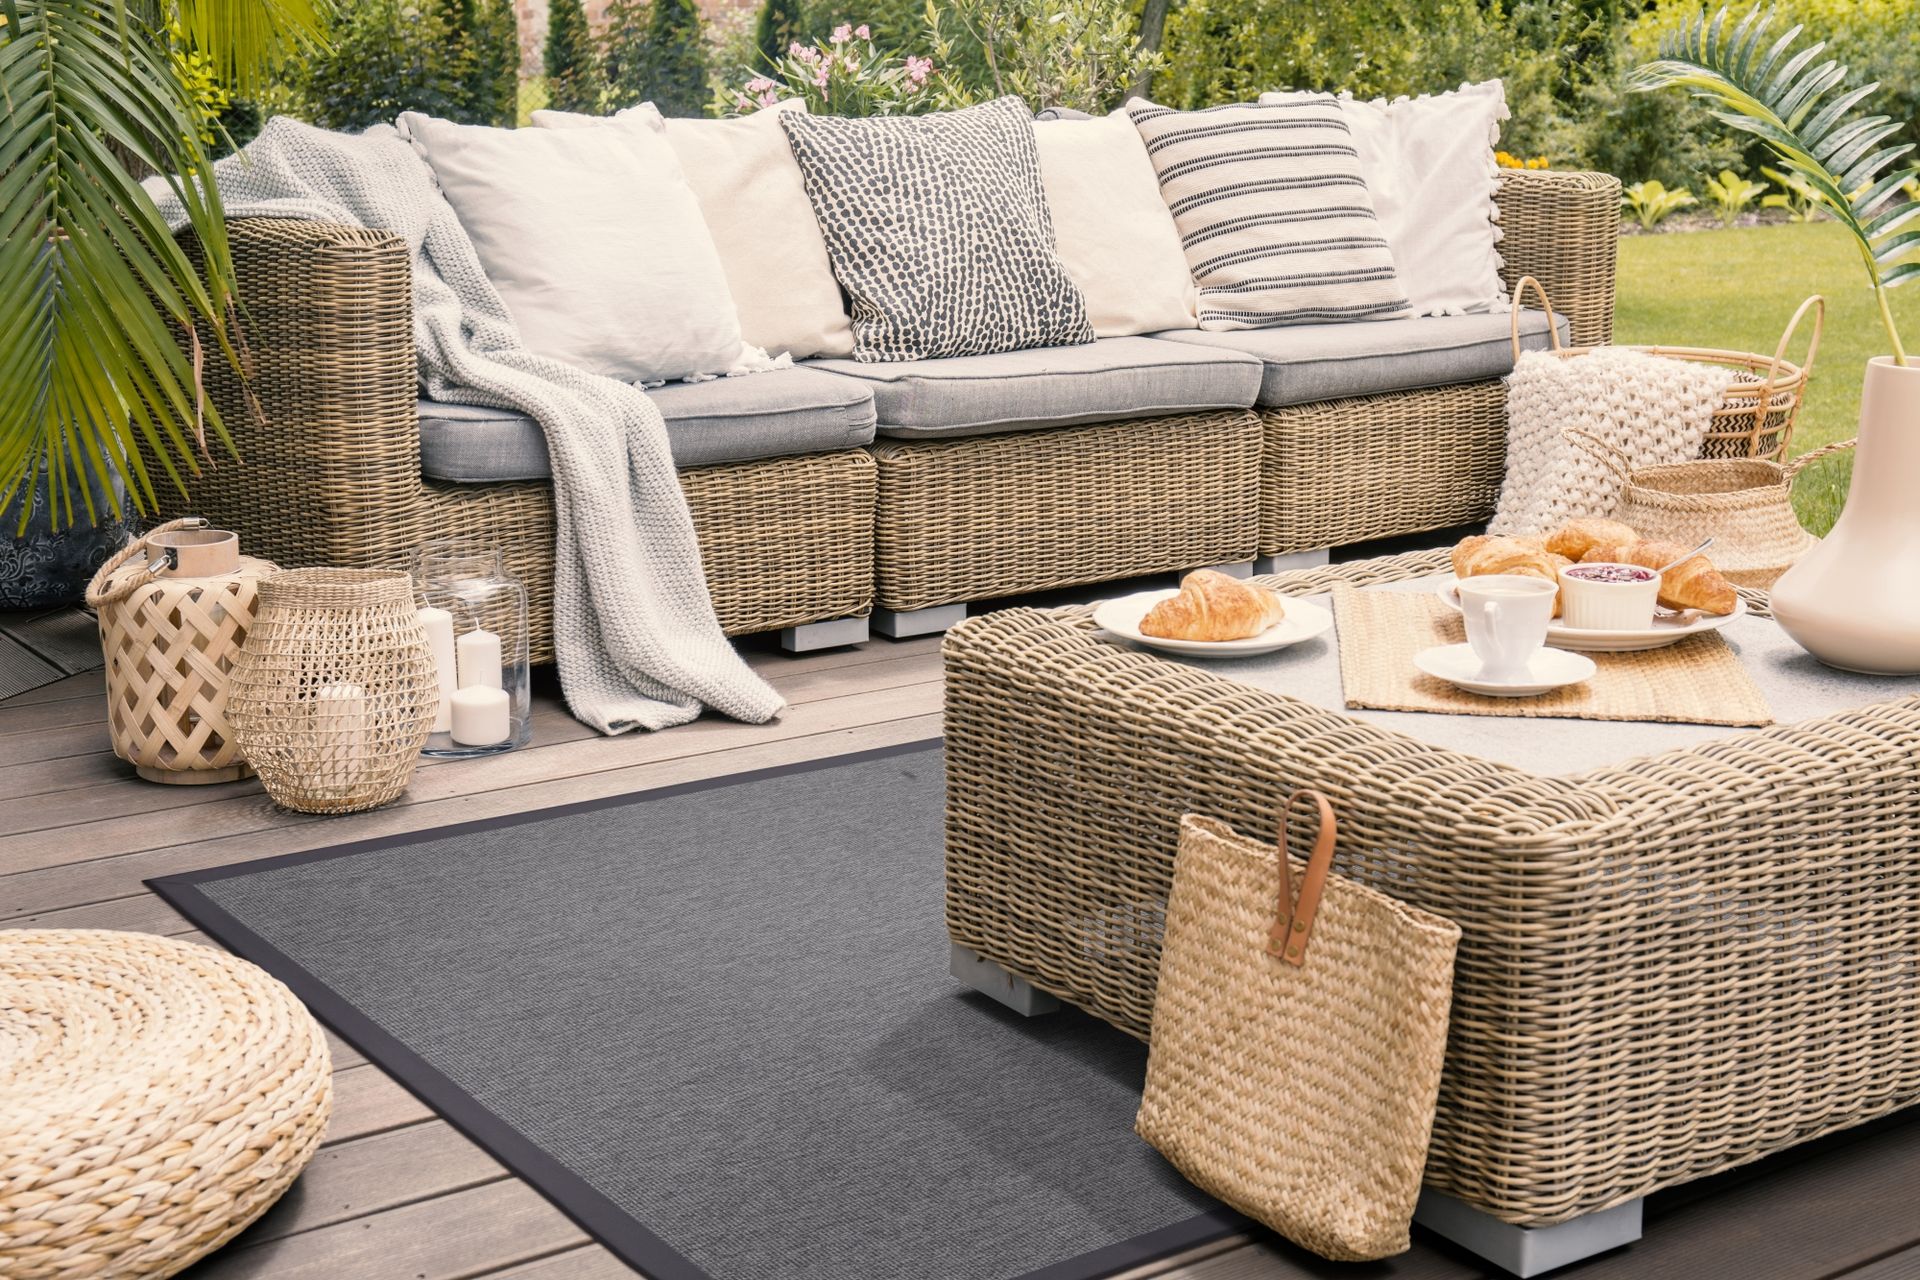 Photo of a Taffino stone gray outdoor rug on a patio.